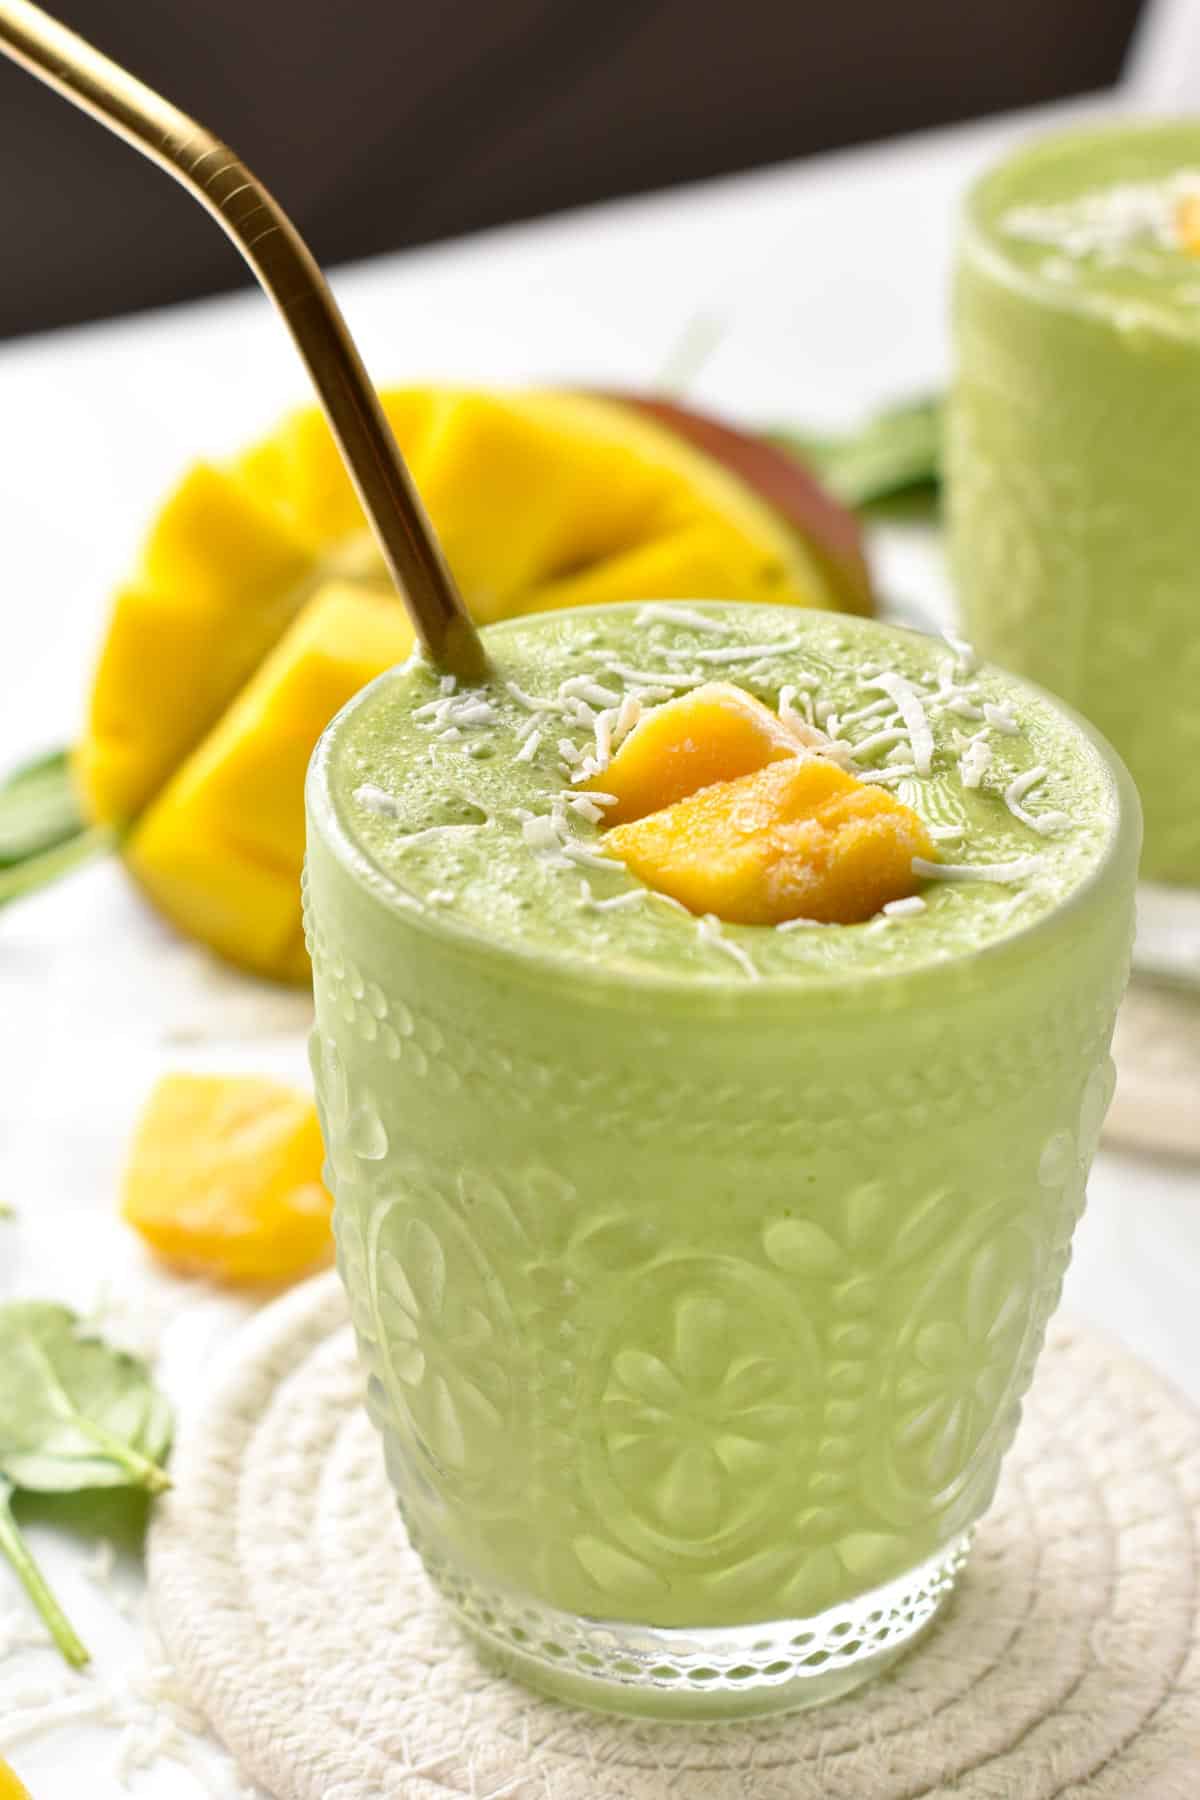 Mango Spinach Smoothie in a small glass decorated with fresh mango and shredded coconut.